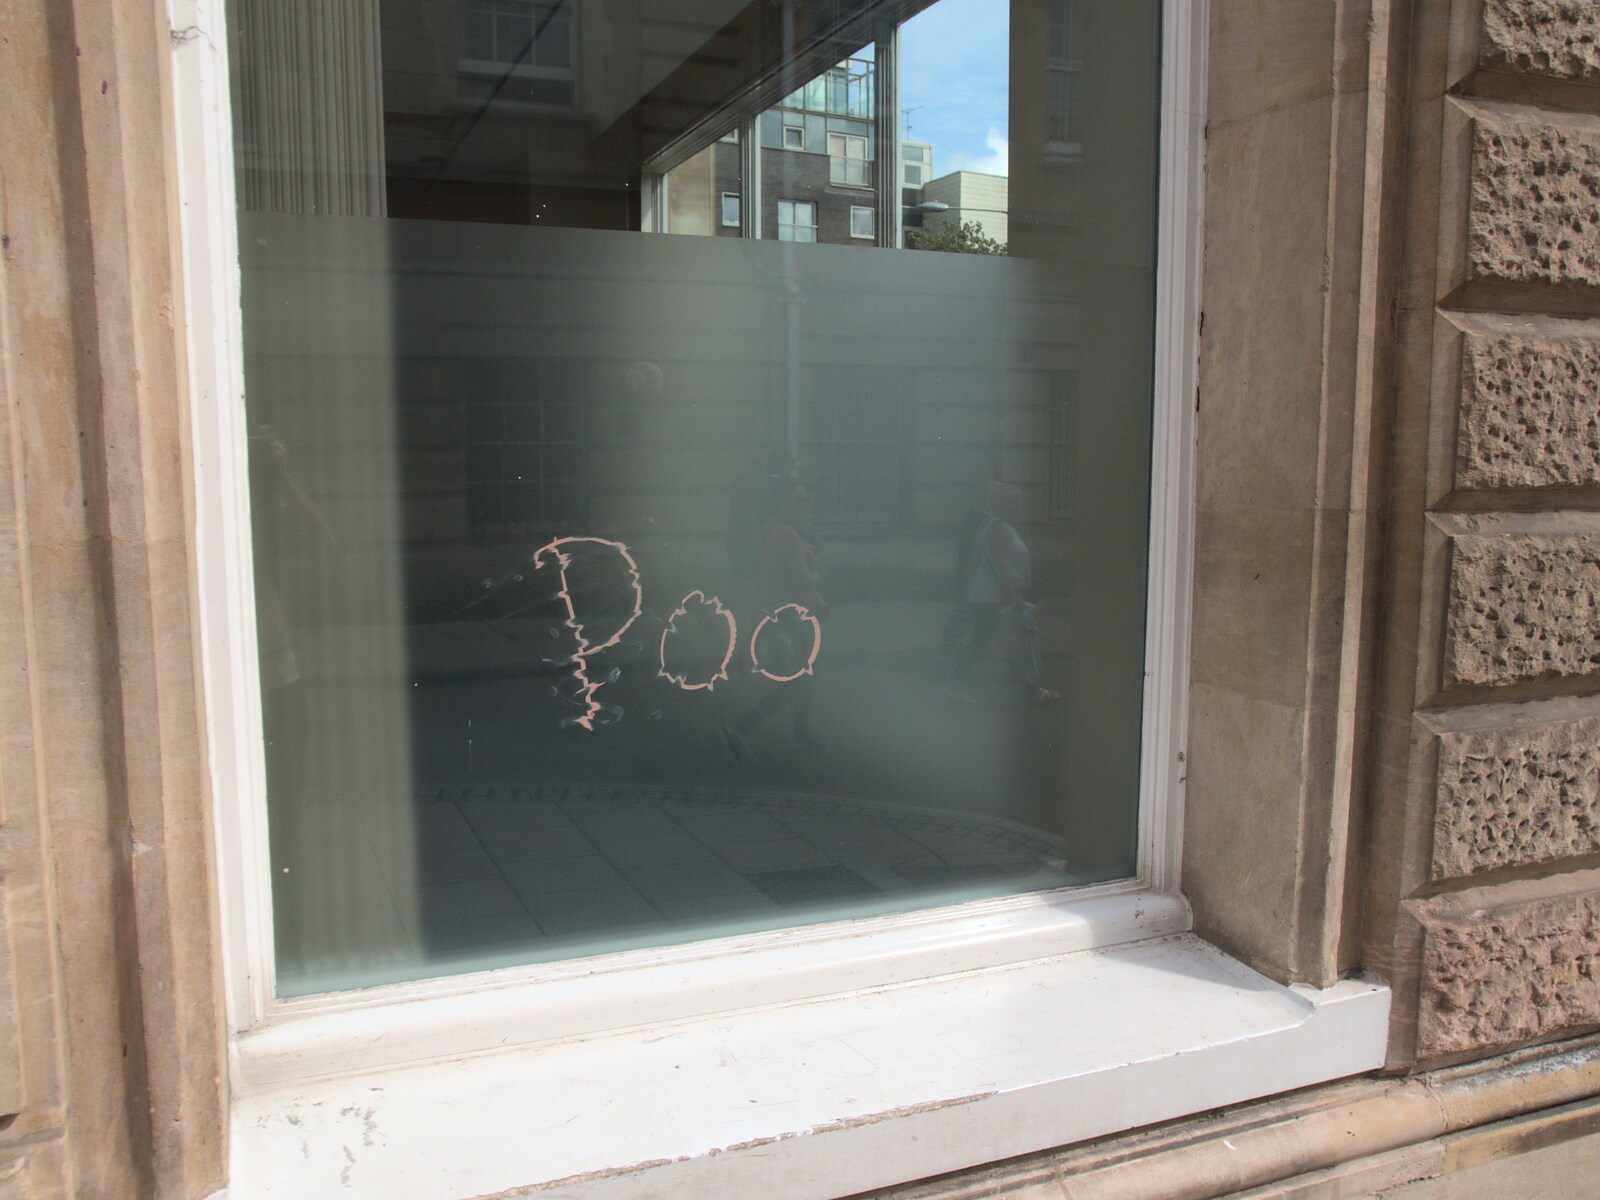 The word Poo, mysteriously written on a window from Head Out Not Home: A Music Day, Norwich, Norfolk - 22nd August 2021